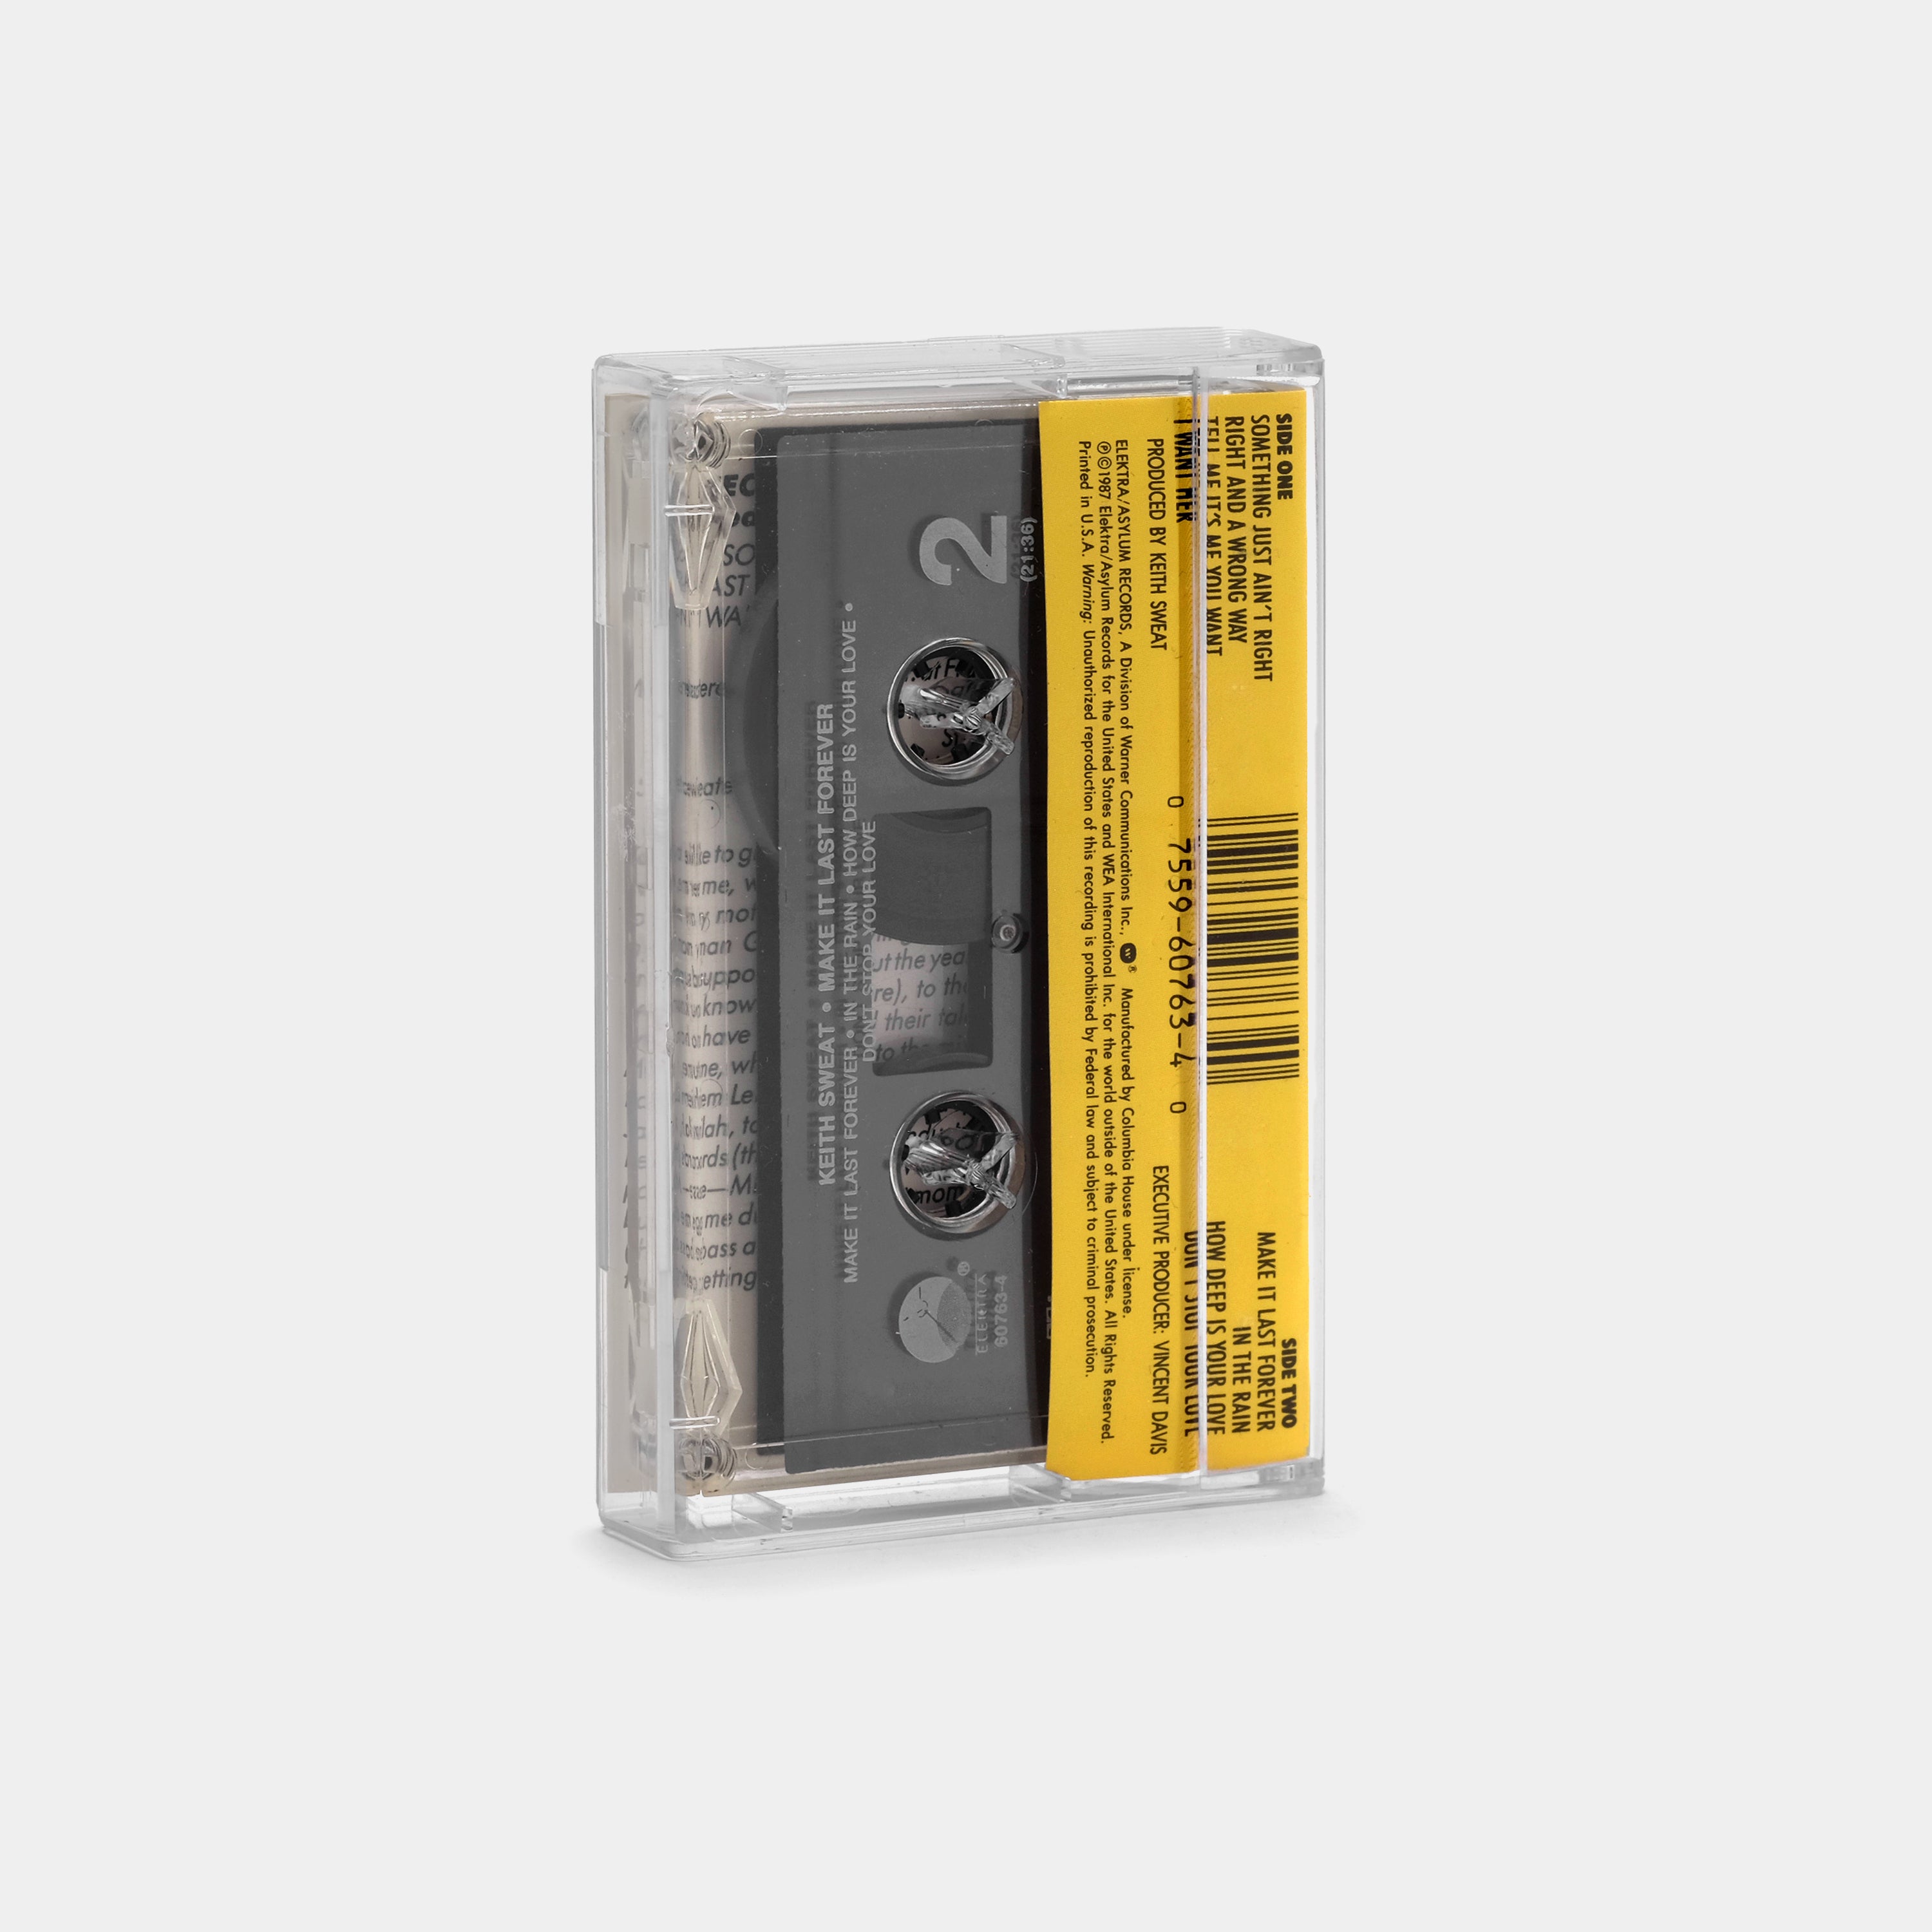 Keith Sweat - Make It Last Forever Cassette Tape